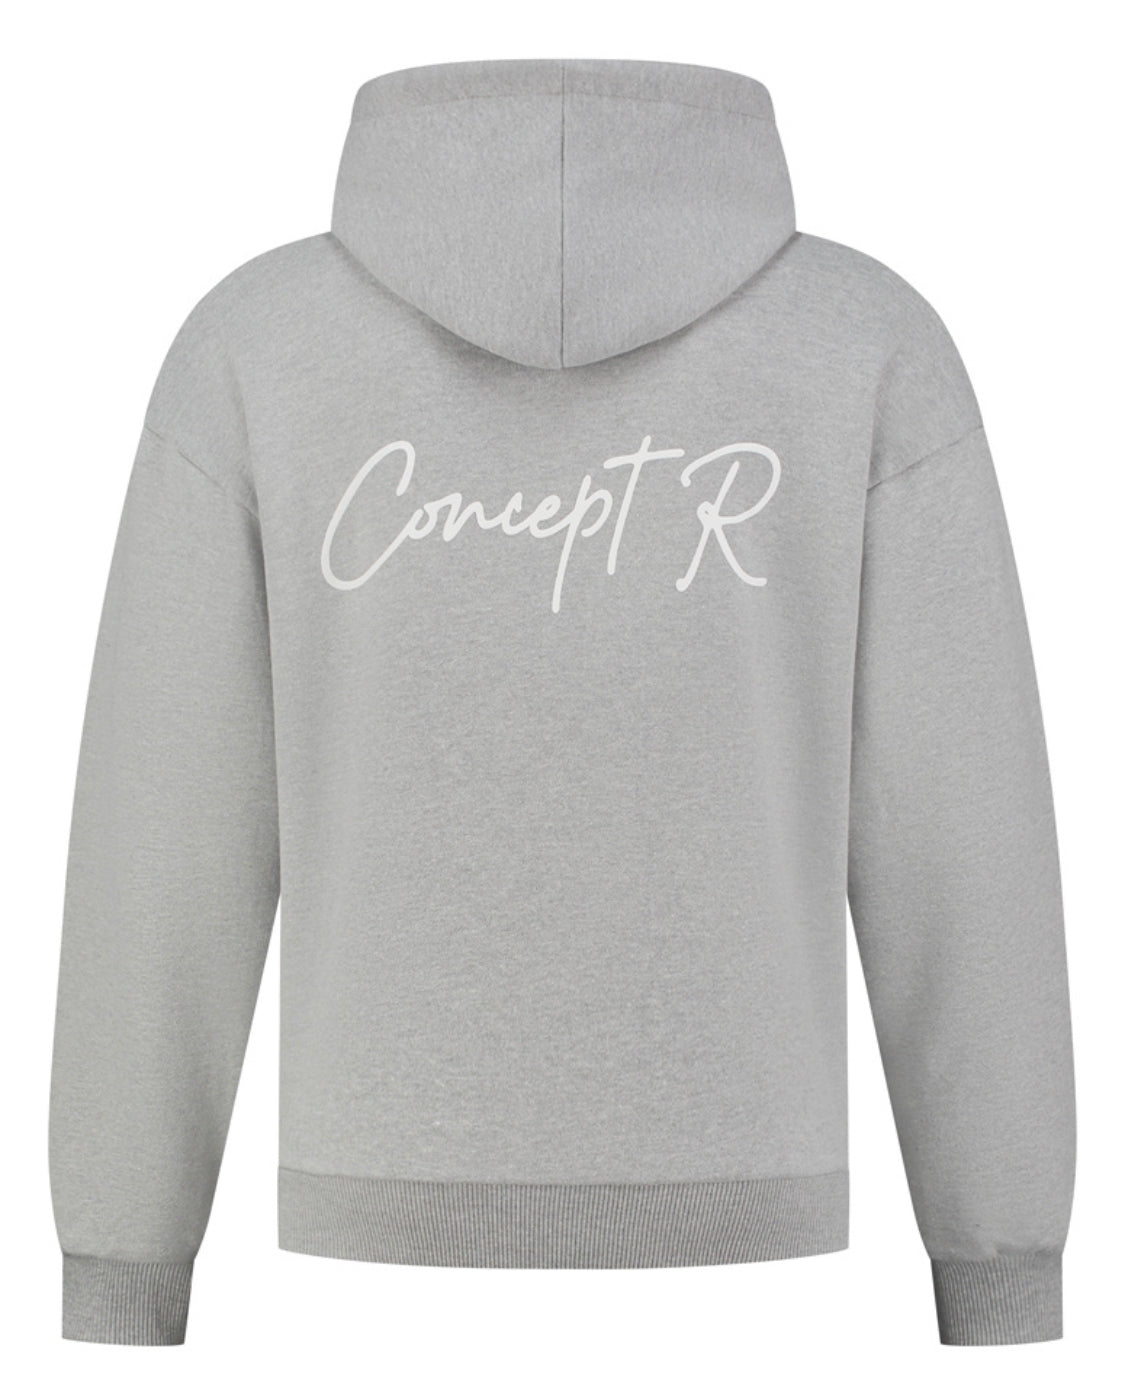 CONCEPT R - ESSENTIAL HOODIE GRAY